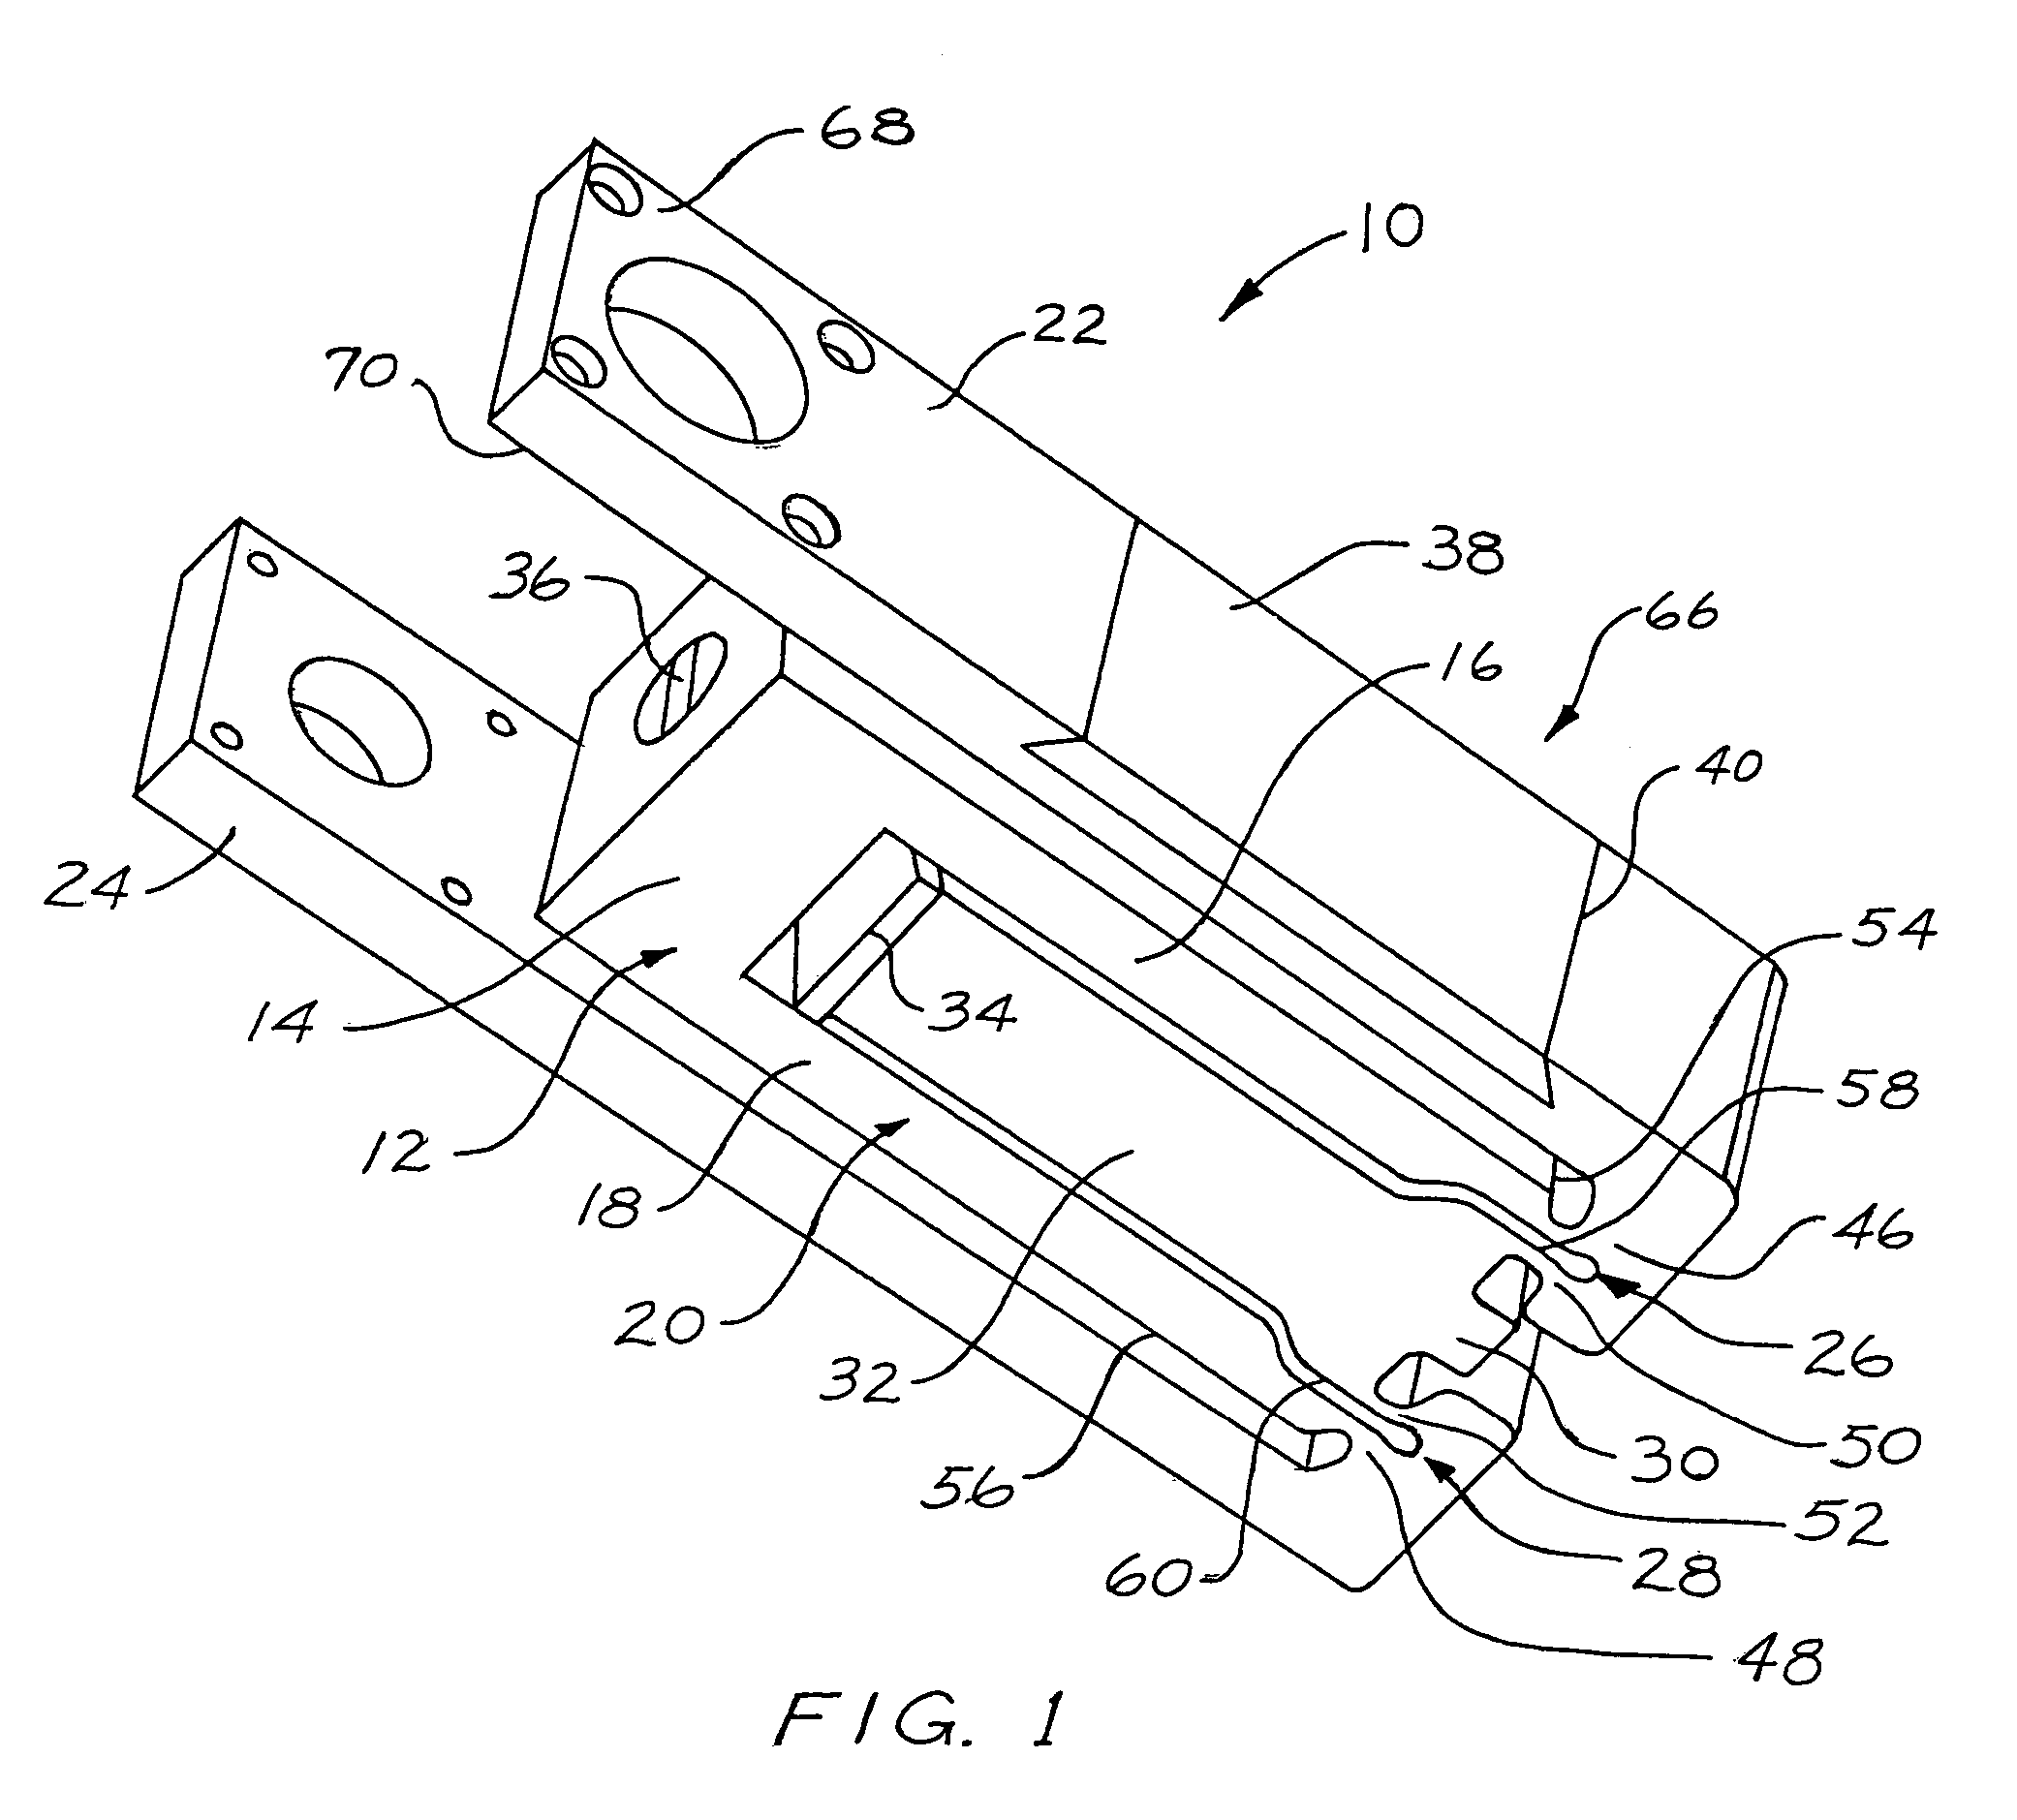 Temperature compensating insert for a mechanically leveraged smart material actuator